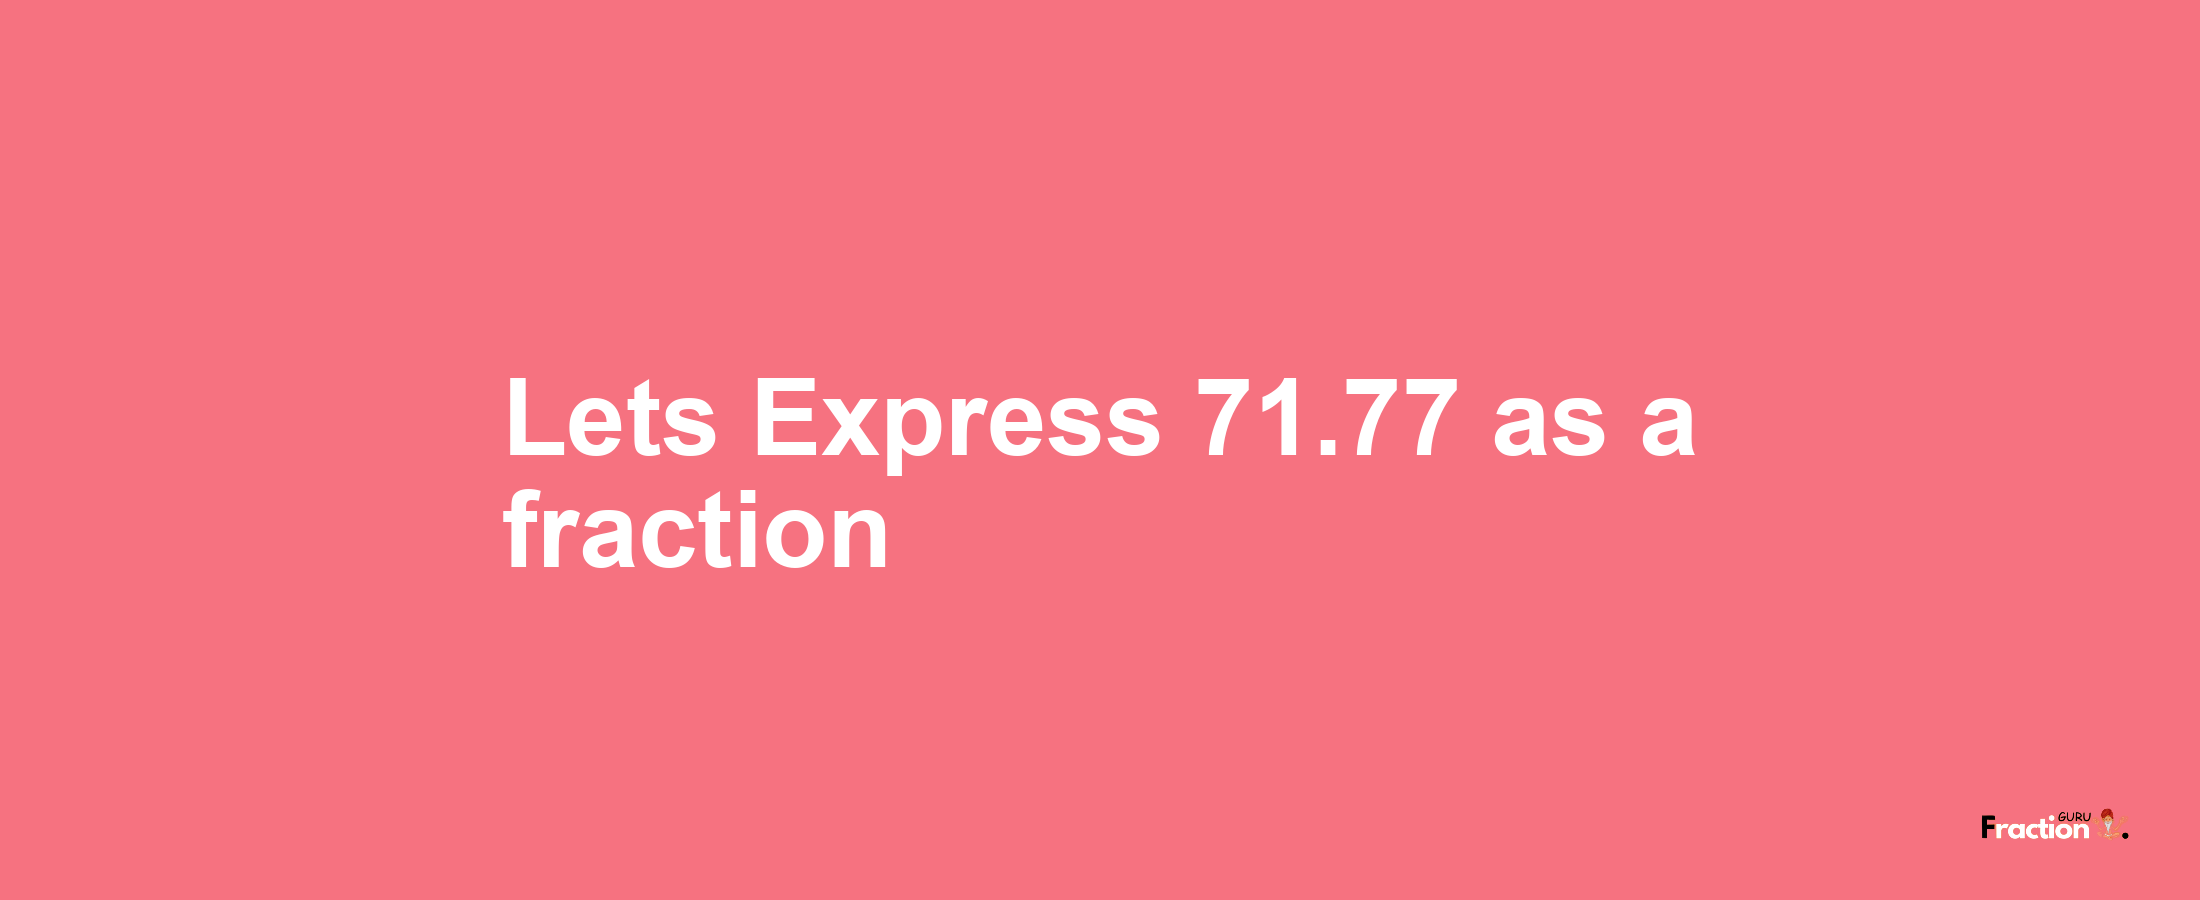 Lets Express 71.77 as afraction